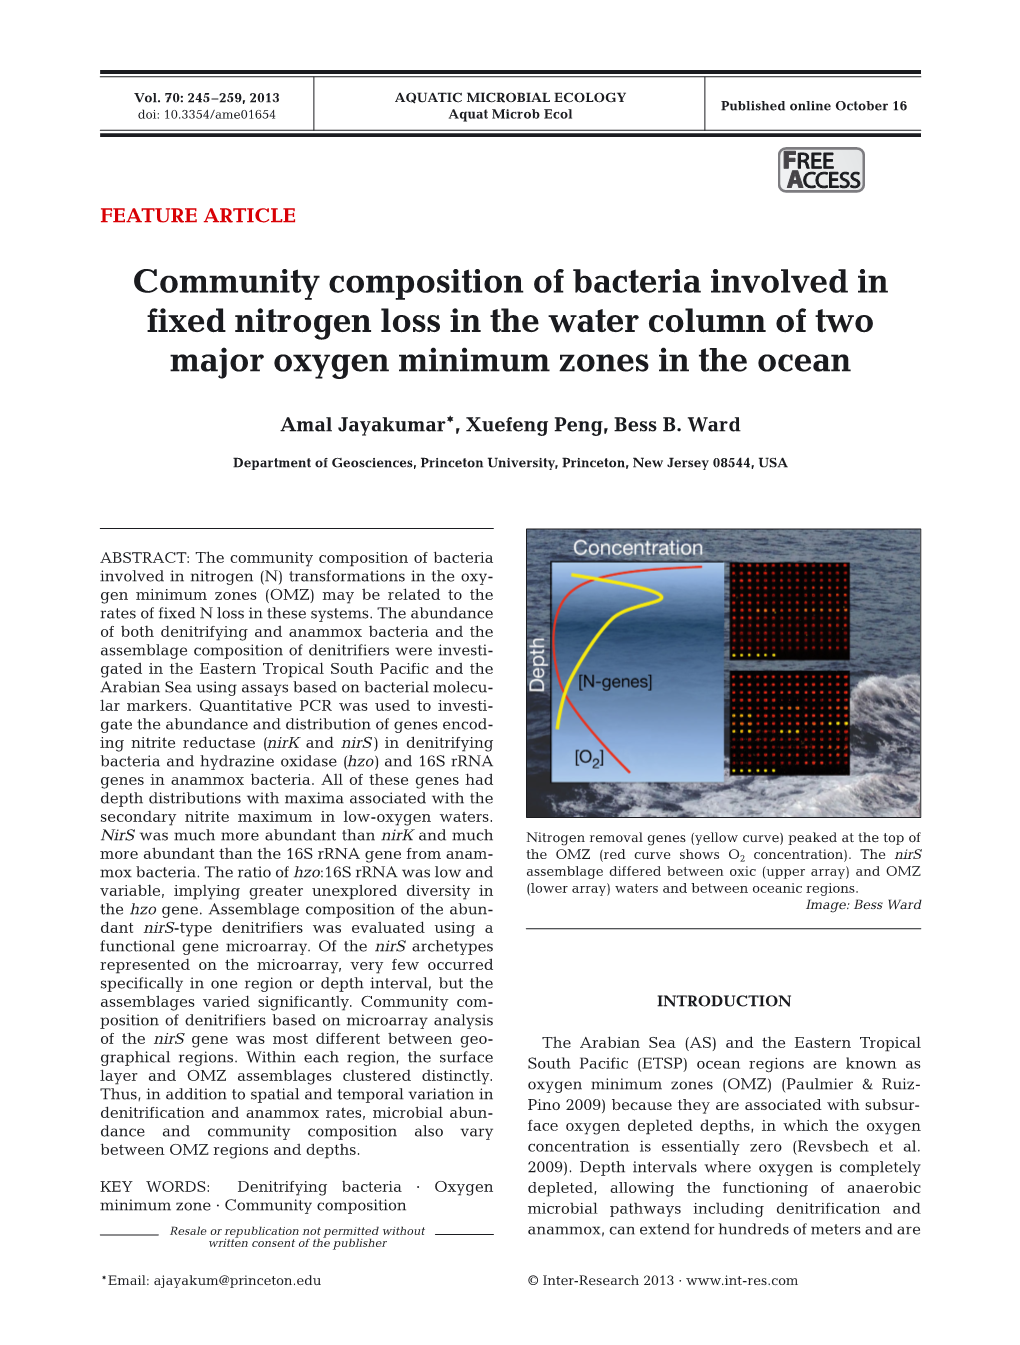 Community Composition of Bacteria Involved in Fixed Nitrogen Loss in the Water Column of Two Major Oxygen Minimum Zones in the Ocean